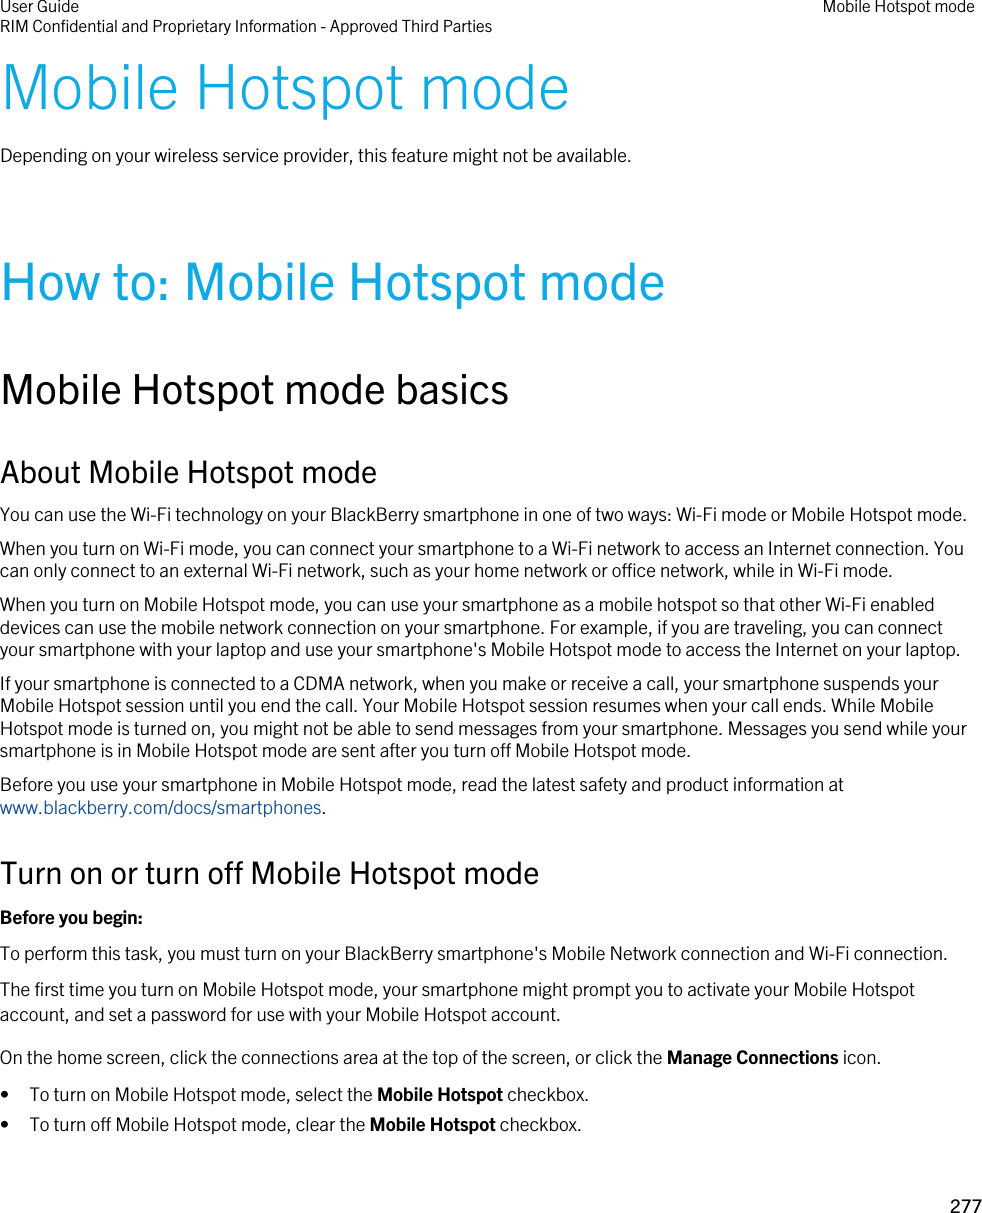 Mobile Hotspot modeDepending on your wireless service provider, this feature might not be available.How to: Mobile Hotspot modeMobile Hotspot mode basicsAbout Mobile Hotspot modeYou can use the Wi-Fi technology on your BlackBerry smartphone in one of two ways: Wi-Fi mode or Mobile Hotspot mode.When you turn on Wi-Fi mode, you can connect your smartphone to a Wi-Fi network to access an Internet connection. You can only connect to an external Wi-Fi network, such as your home network or office network, while in Wi-Fi mode.When you turn on Mobile Hotspot mode, you can use your smartphone as a mobile hotspot so that other Wi-Fi enabled devices can use the mobile network connection on your smartphone. For example, if you are traveling, you can connect your smartphone with your laptop and use your smartphone&apos;s Mobile Hotspot mode to access the Internet on your laptop.If your smartphone is connected to a CDMA network, when you make or receive a call, your smartphone suspends your Mobile Hotspot session until you end the call. Your Mobile Hotspot session resumes when your call ends. While Mobile Hotspot mode is turned on, you might not be able to send messages from your smartphone. Messages you send while your smartphone is in Mobile Hotspot mode are sent after you turn off Mobile Hotspot mode.Before you use your smartphone in Mobile Hotspot mode, read the latest safety and product information at www.blackberry.com/docs/smartphones.Turn on or turn off Mobile Hotspot modeBefore you begin: To perform this task, you must turn on your BlackBerry smartphone&apos;s Mobile Network connection and Wi-Fi connection.The first time you turn on Mobile Hotspot mode, your smartphone might prompt you to activate your Mobile Hotspot account, and set a password for use with your Mobile Hotspot account.On the home screen, click the connections area at the top of the screen, or click the Manage Connections icon.• To turn on Mobile Hotspot mode, select the Mobile Hotspot checkbox.• To turn off Mobile Hotspot mode, clear the Mobile Hotspot checkbox.User GuideRIM Confidential and Proprietary Information - Approved Third Parties Mobile Hotspot mode277 